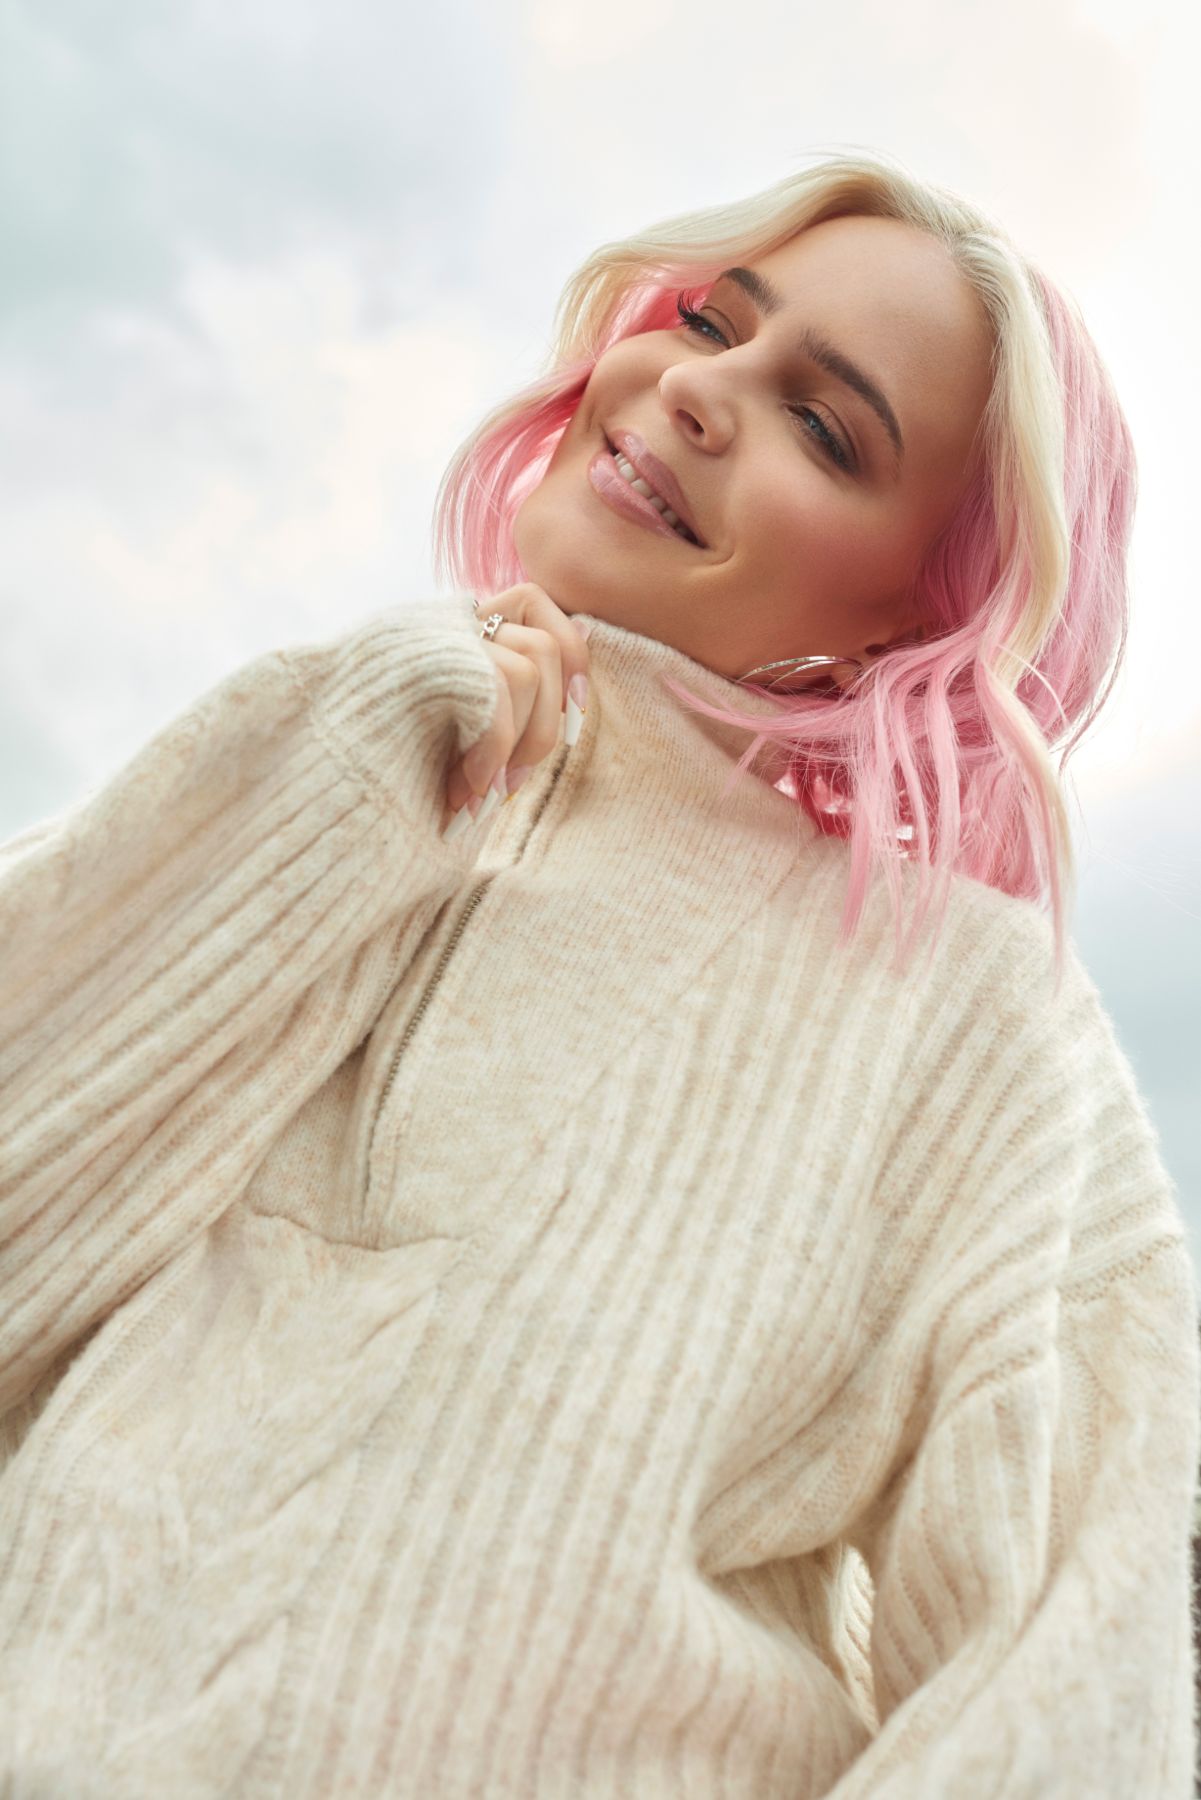 Anne Marie in New Look's Autumn/Winter Talent Campaign 2021